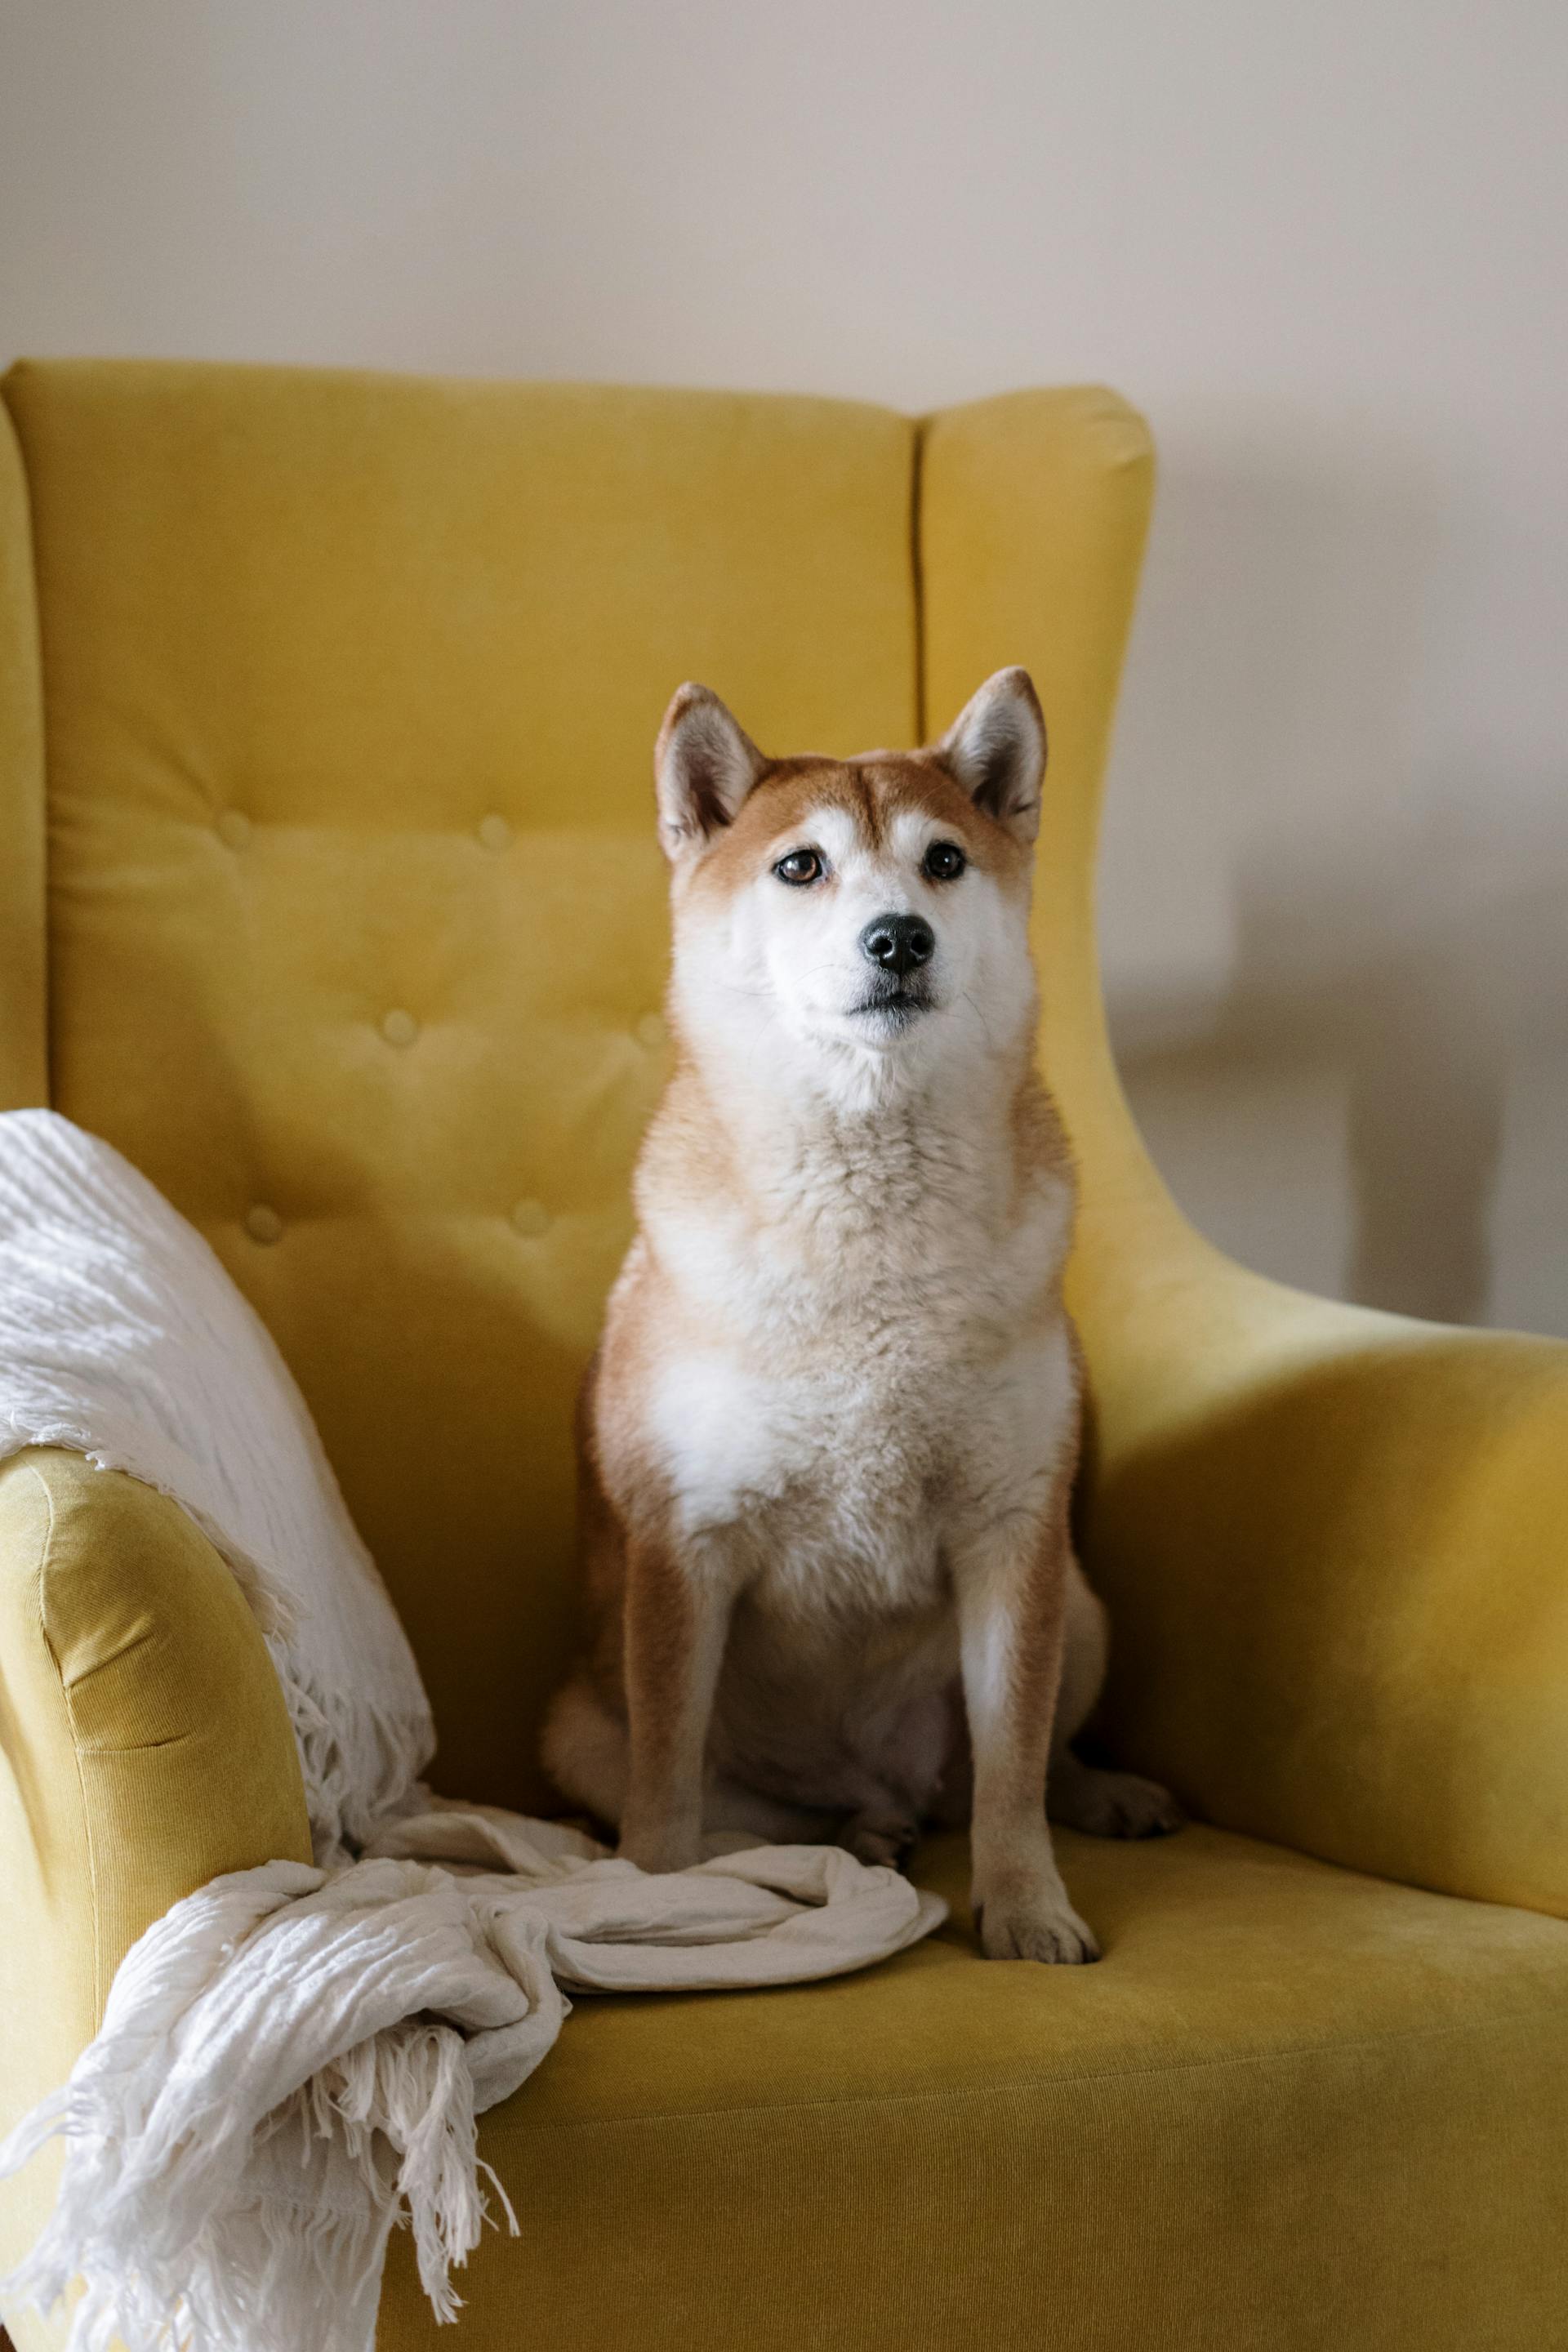 A dog sitting on an armchair | Source: Pexels